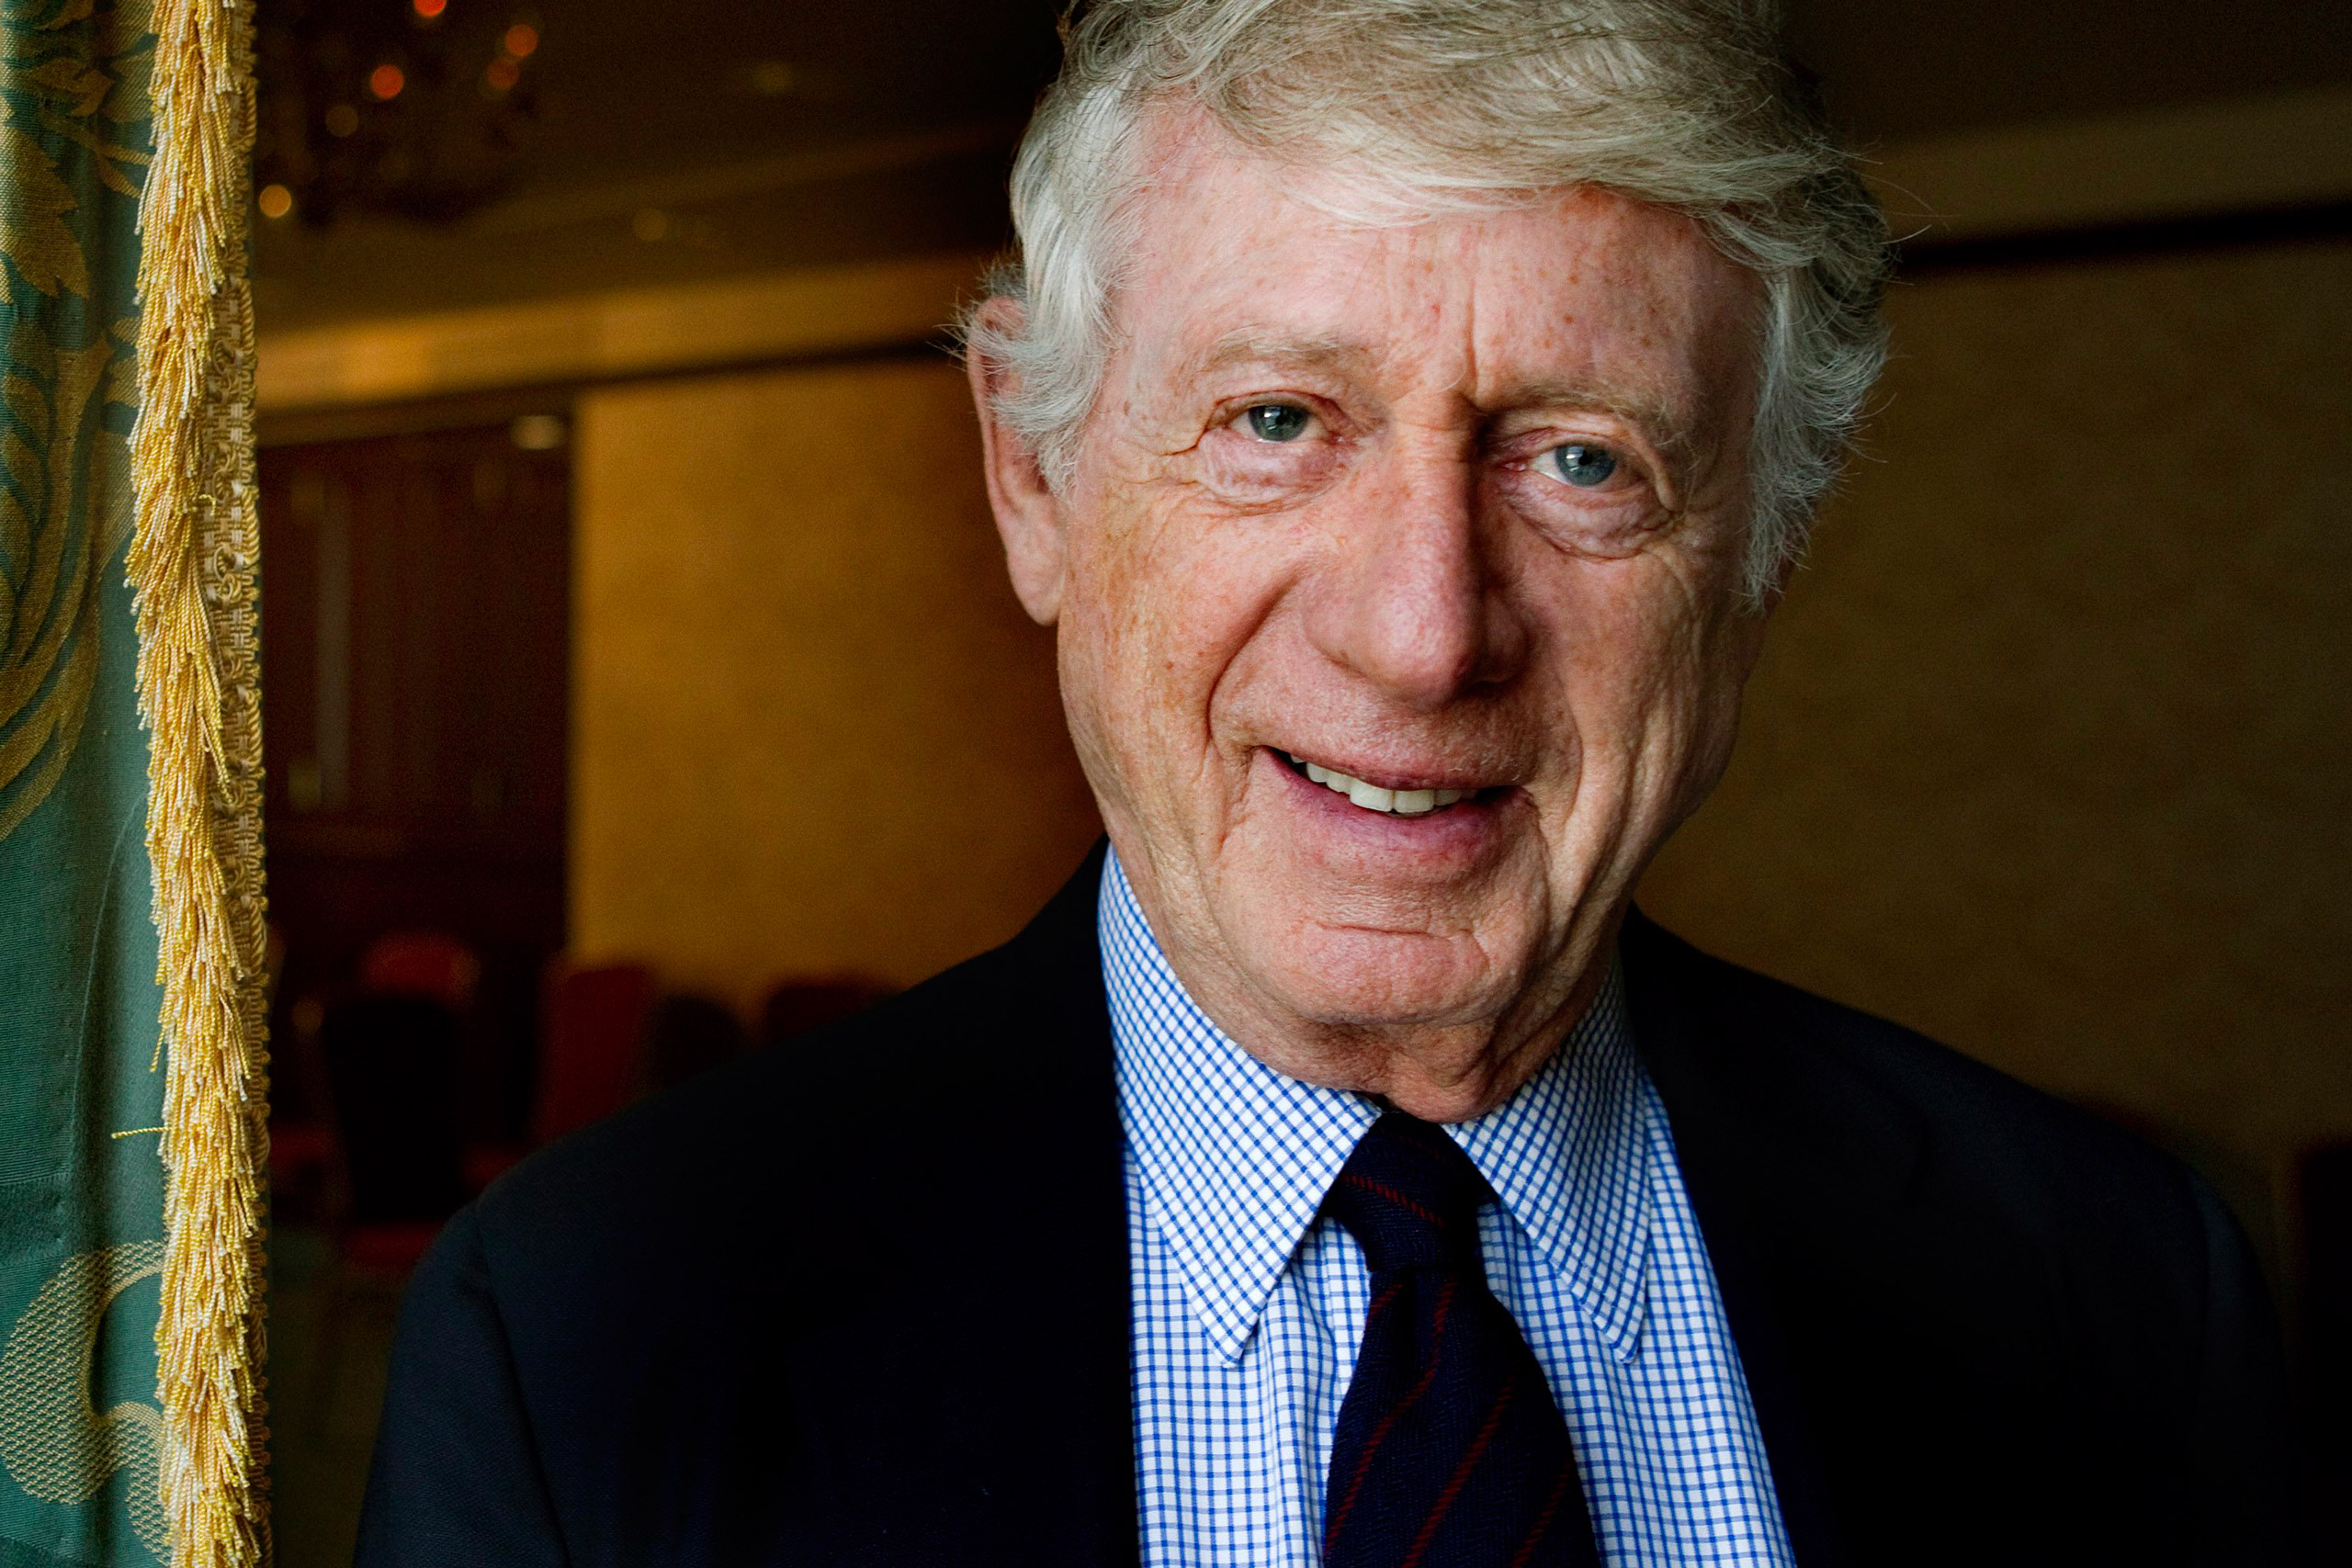 Former television journalist Ted Koppel poses for a photo in a Toronto hotel on Thursday, June 7, 2012. (AP Photo/Chris Young, Canadian Press)